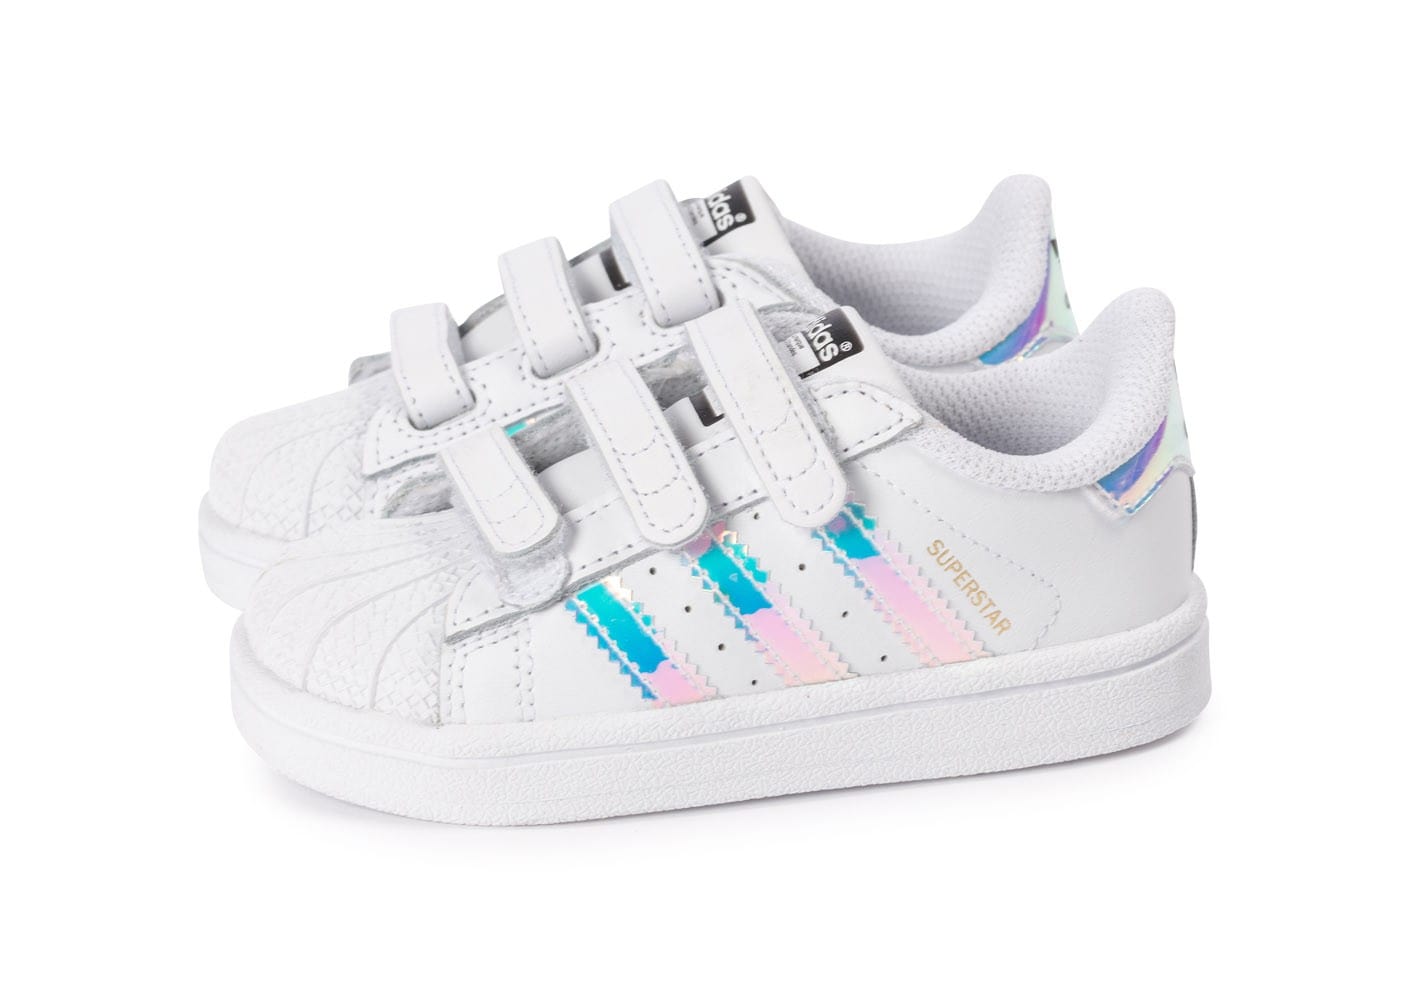 chaussure fille 33 adidas